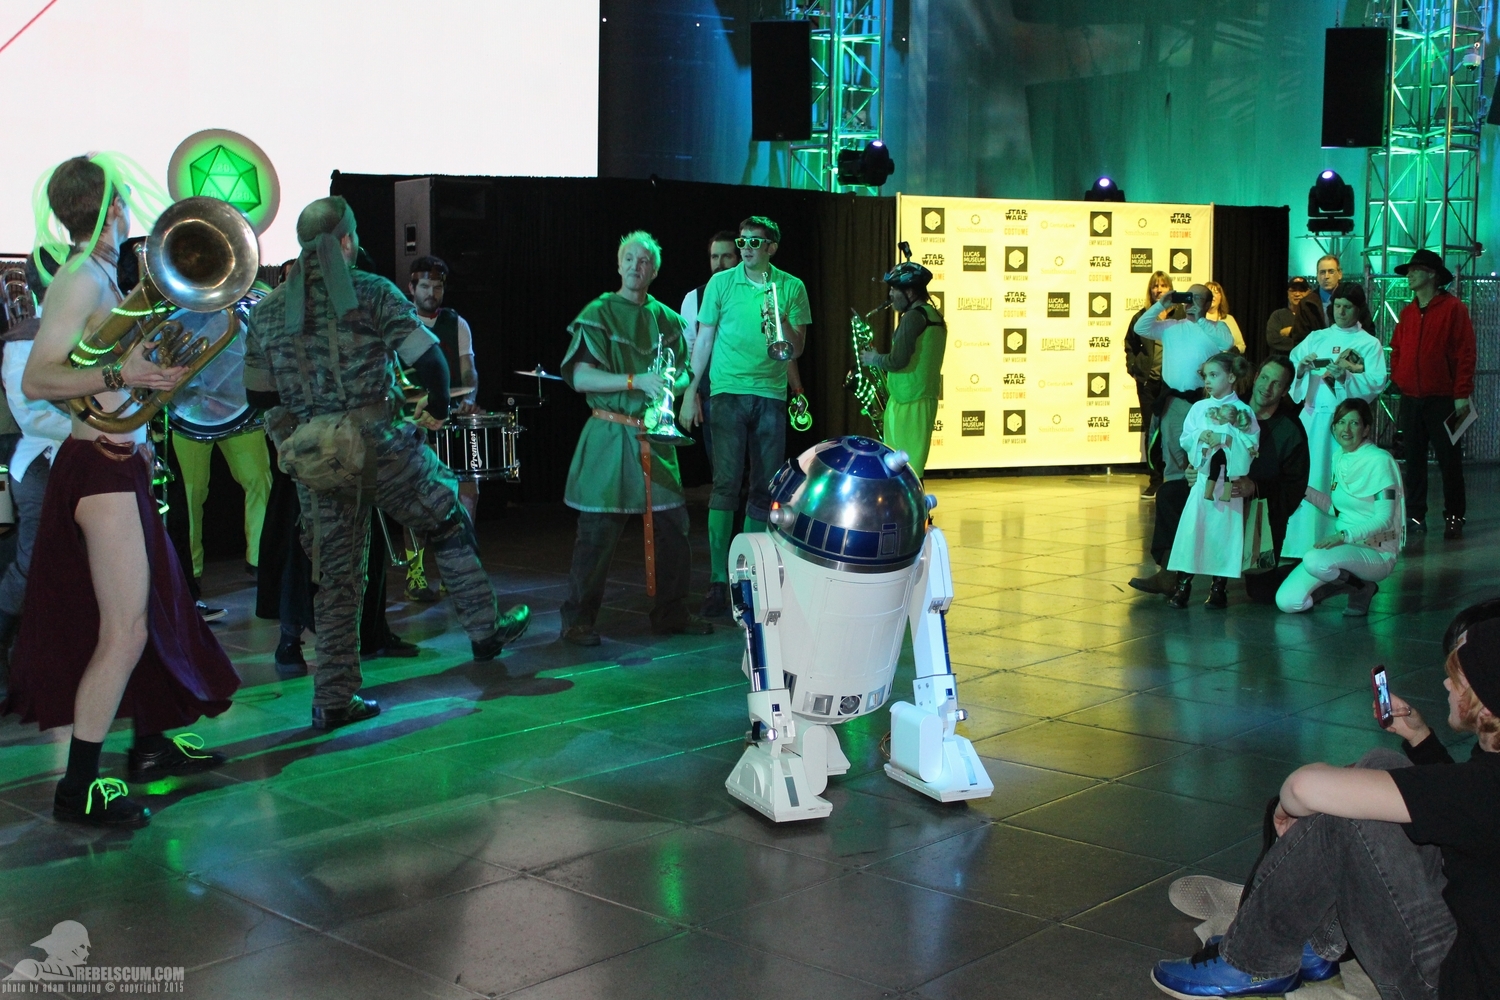 star-wars-the-power-of-costume-seattle-emp-museum-launch-party-013015-010.JPG